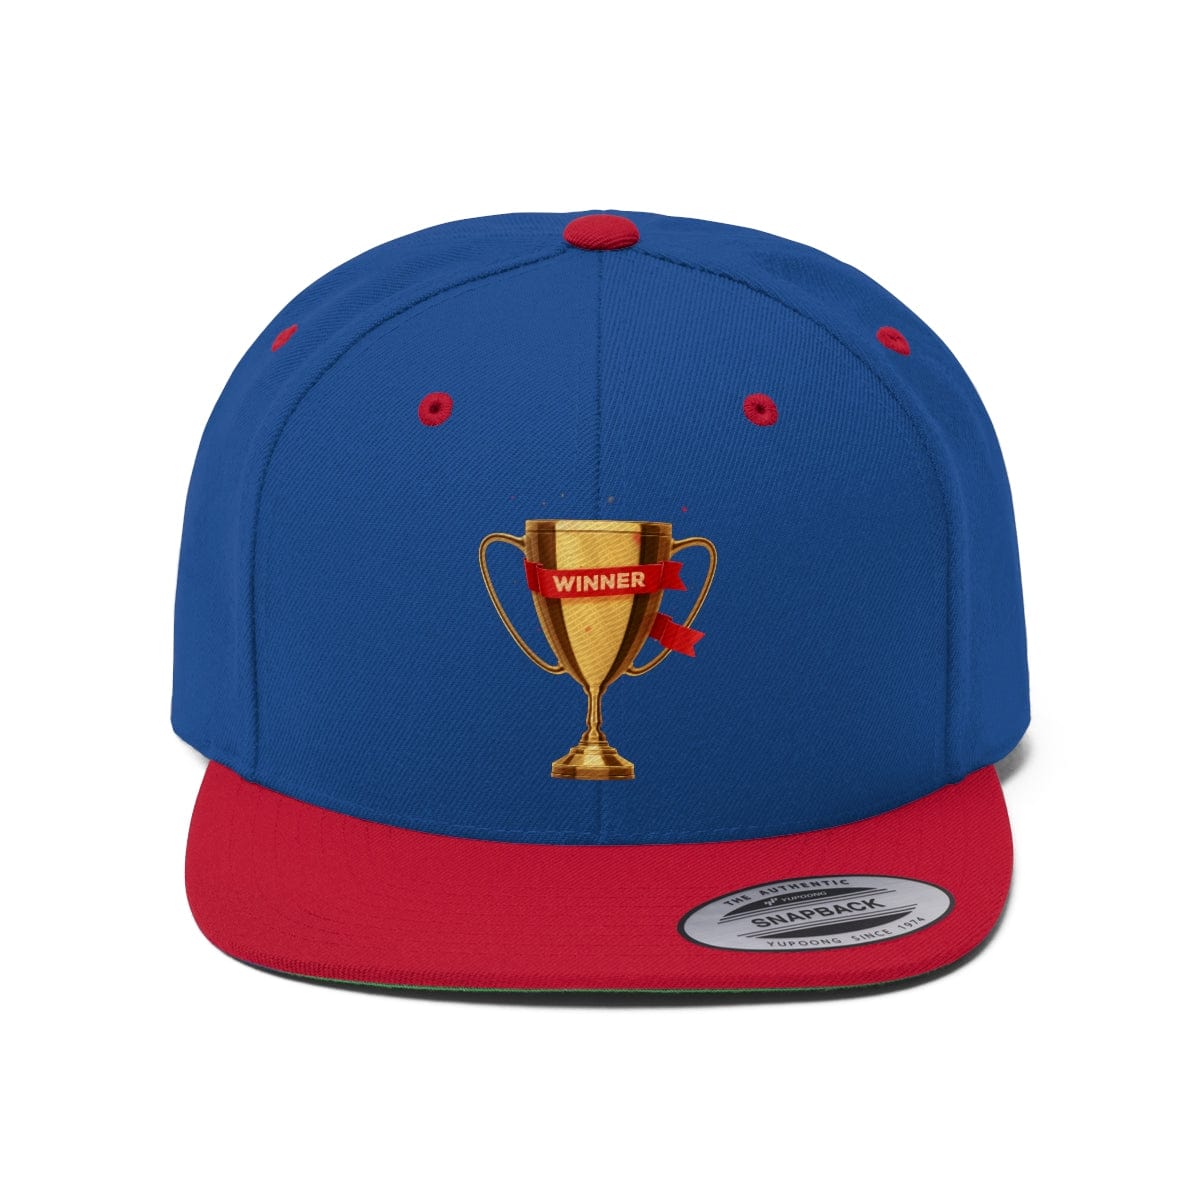 The You Got The Trophy True Navy Color Unisex Baseball Hat